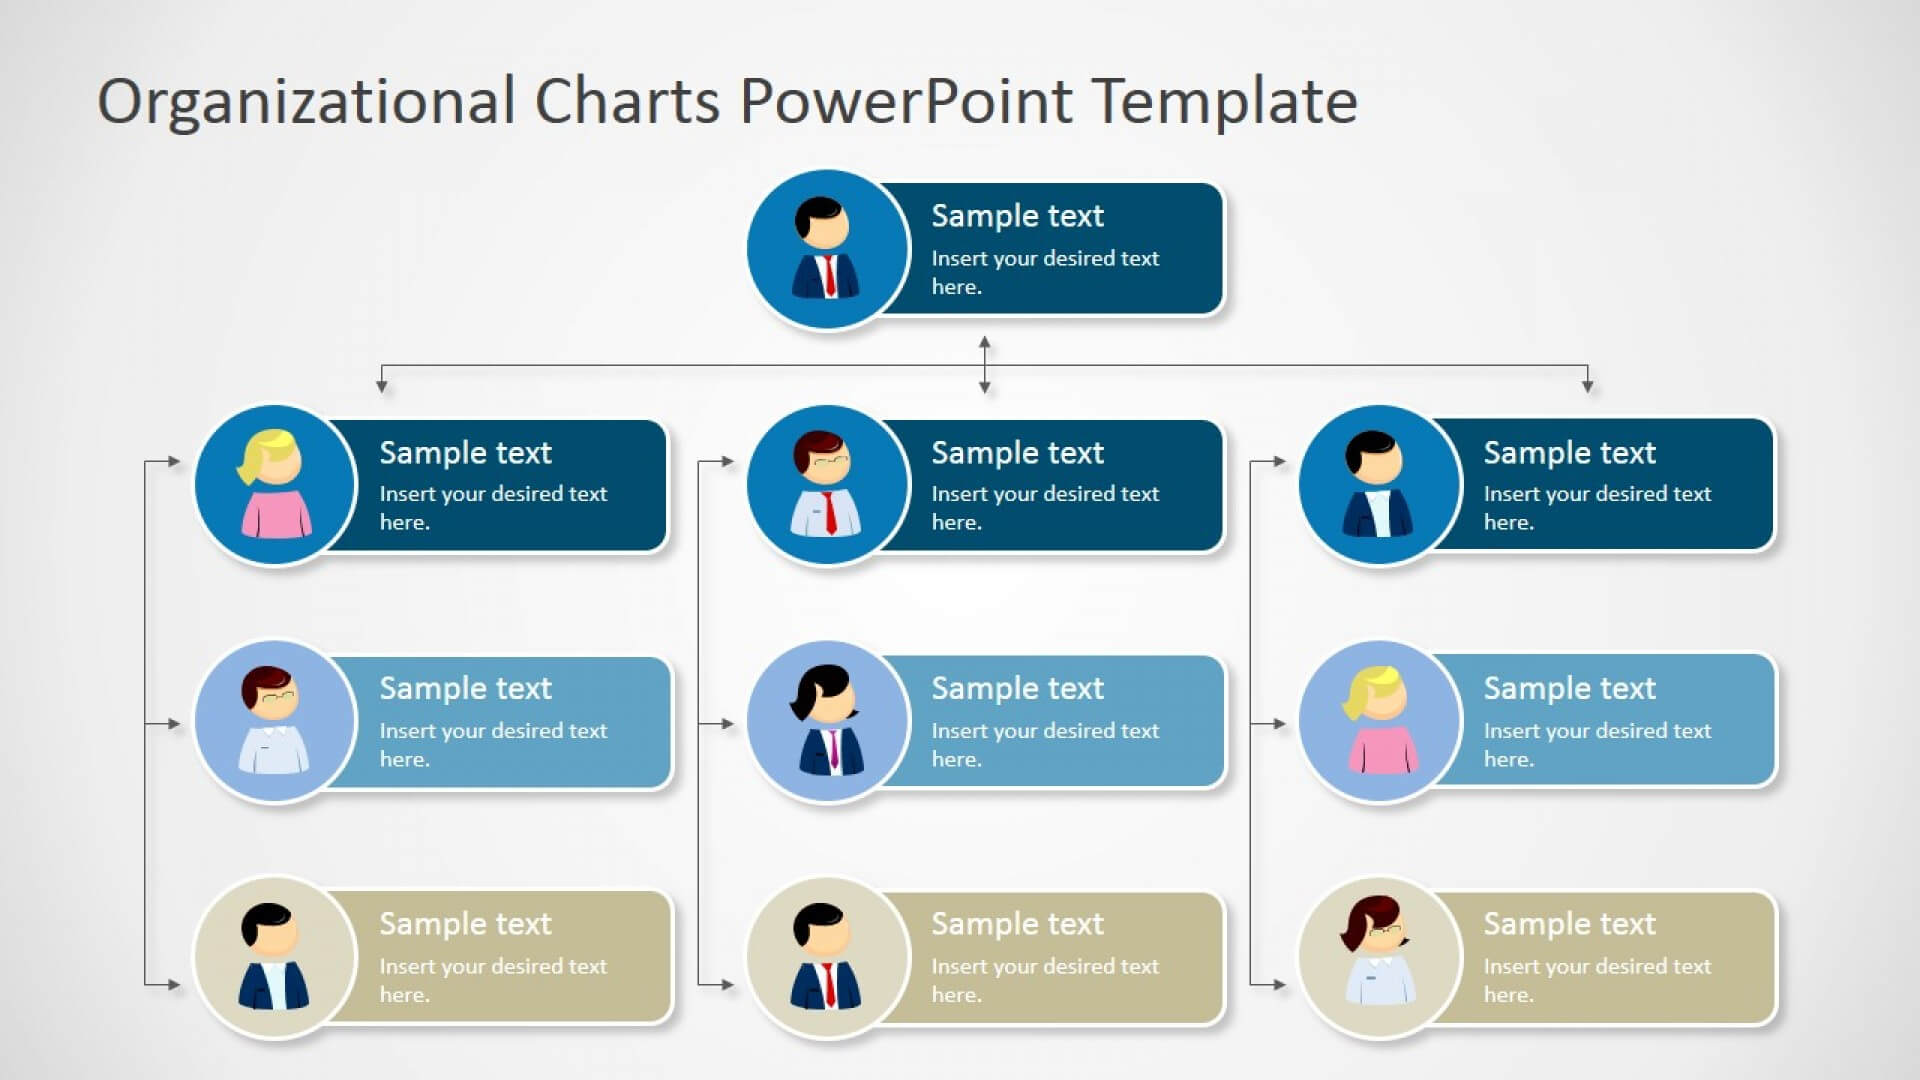 017 Microsoft Org Chart Template Powerpoint Organizational Pertaining To Microsoft Powerpoint Org Chart Template